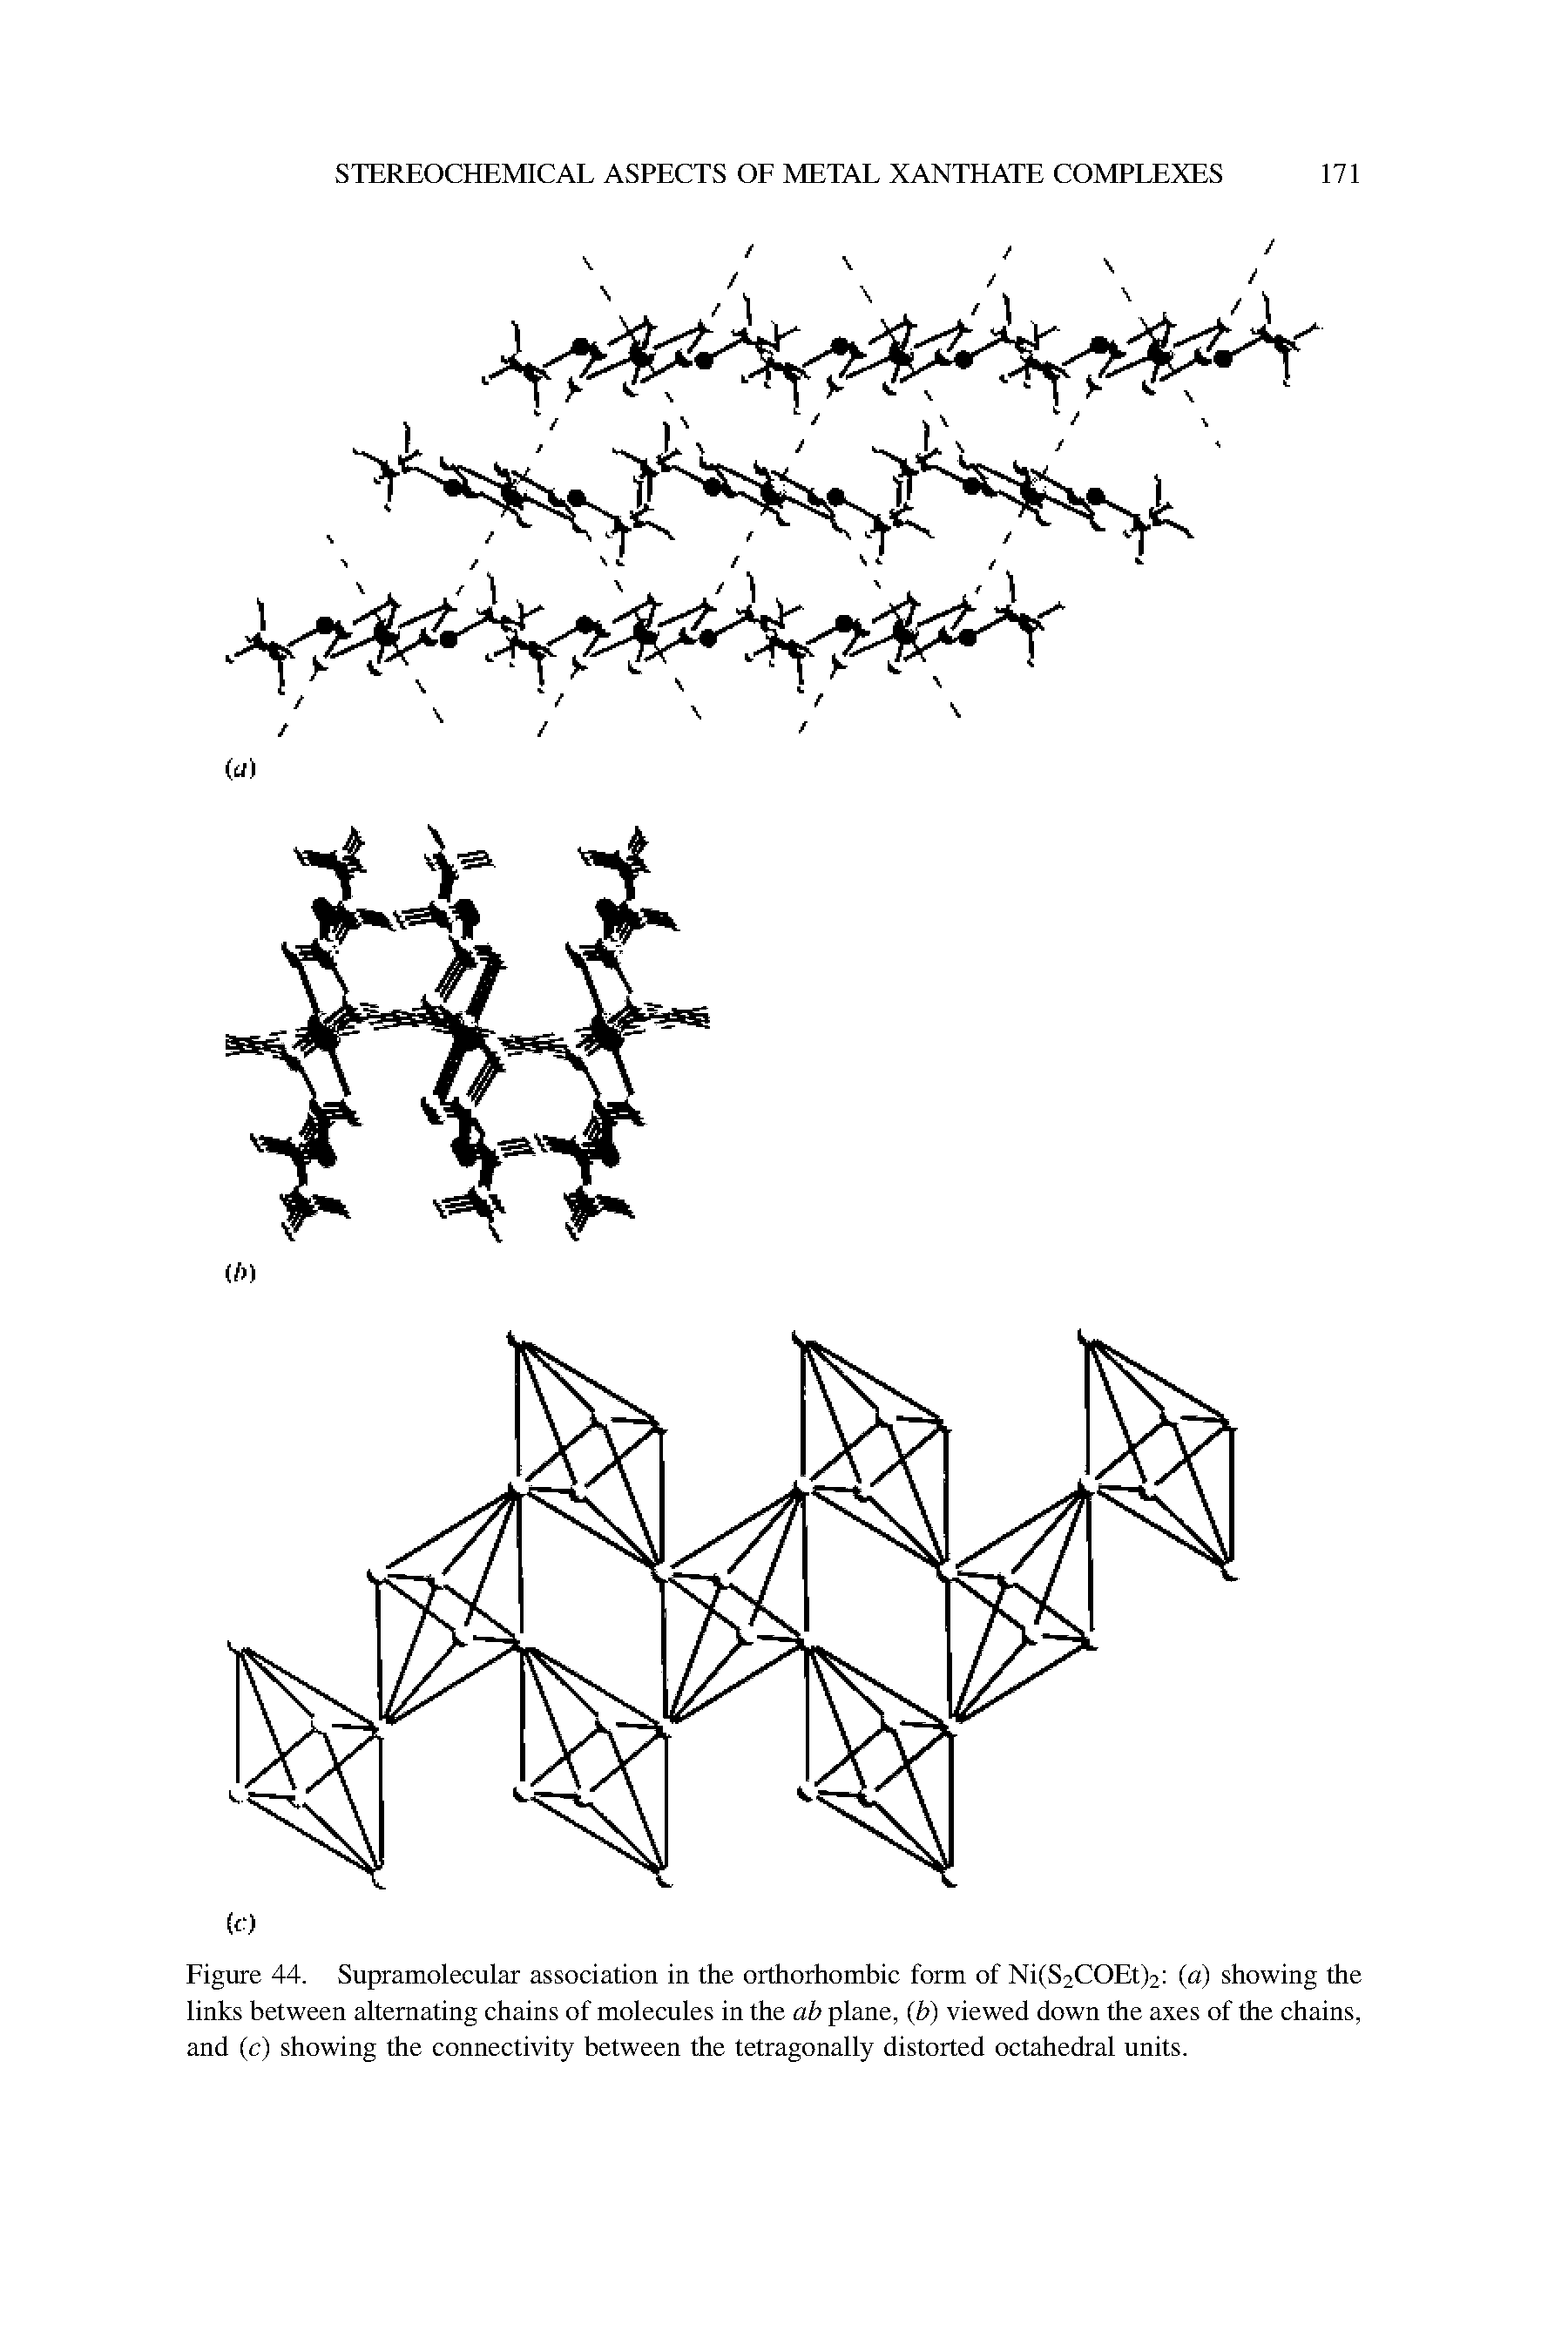 Figure 44. Supramolecular association in the orthorhombic form of Ni(S2COEt)2 (a) showing the links between alternating chains of molecules in the ab plane, (b) viewed down the axes of the chains, and (c) showing the connectivity between the tetragonally distorted octahedral units.